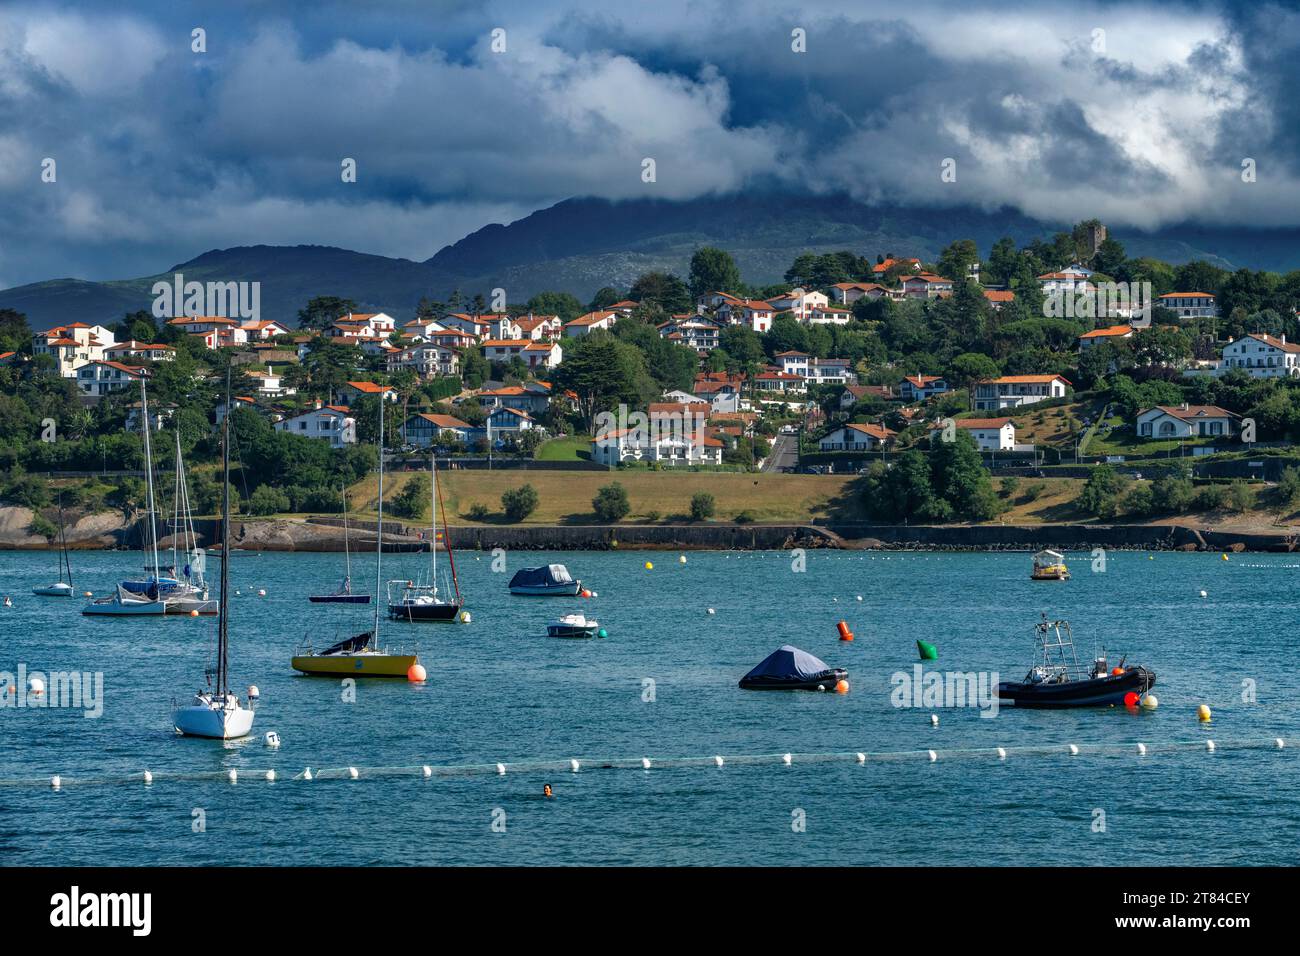 The Rhune mountain overlooking Ciboure Basque country. France Small coloreful fish boats on the old port of cituadel in front of Saint Jean de luz. Stock Photo